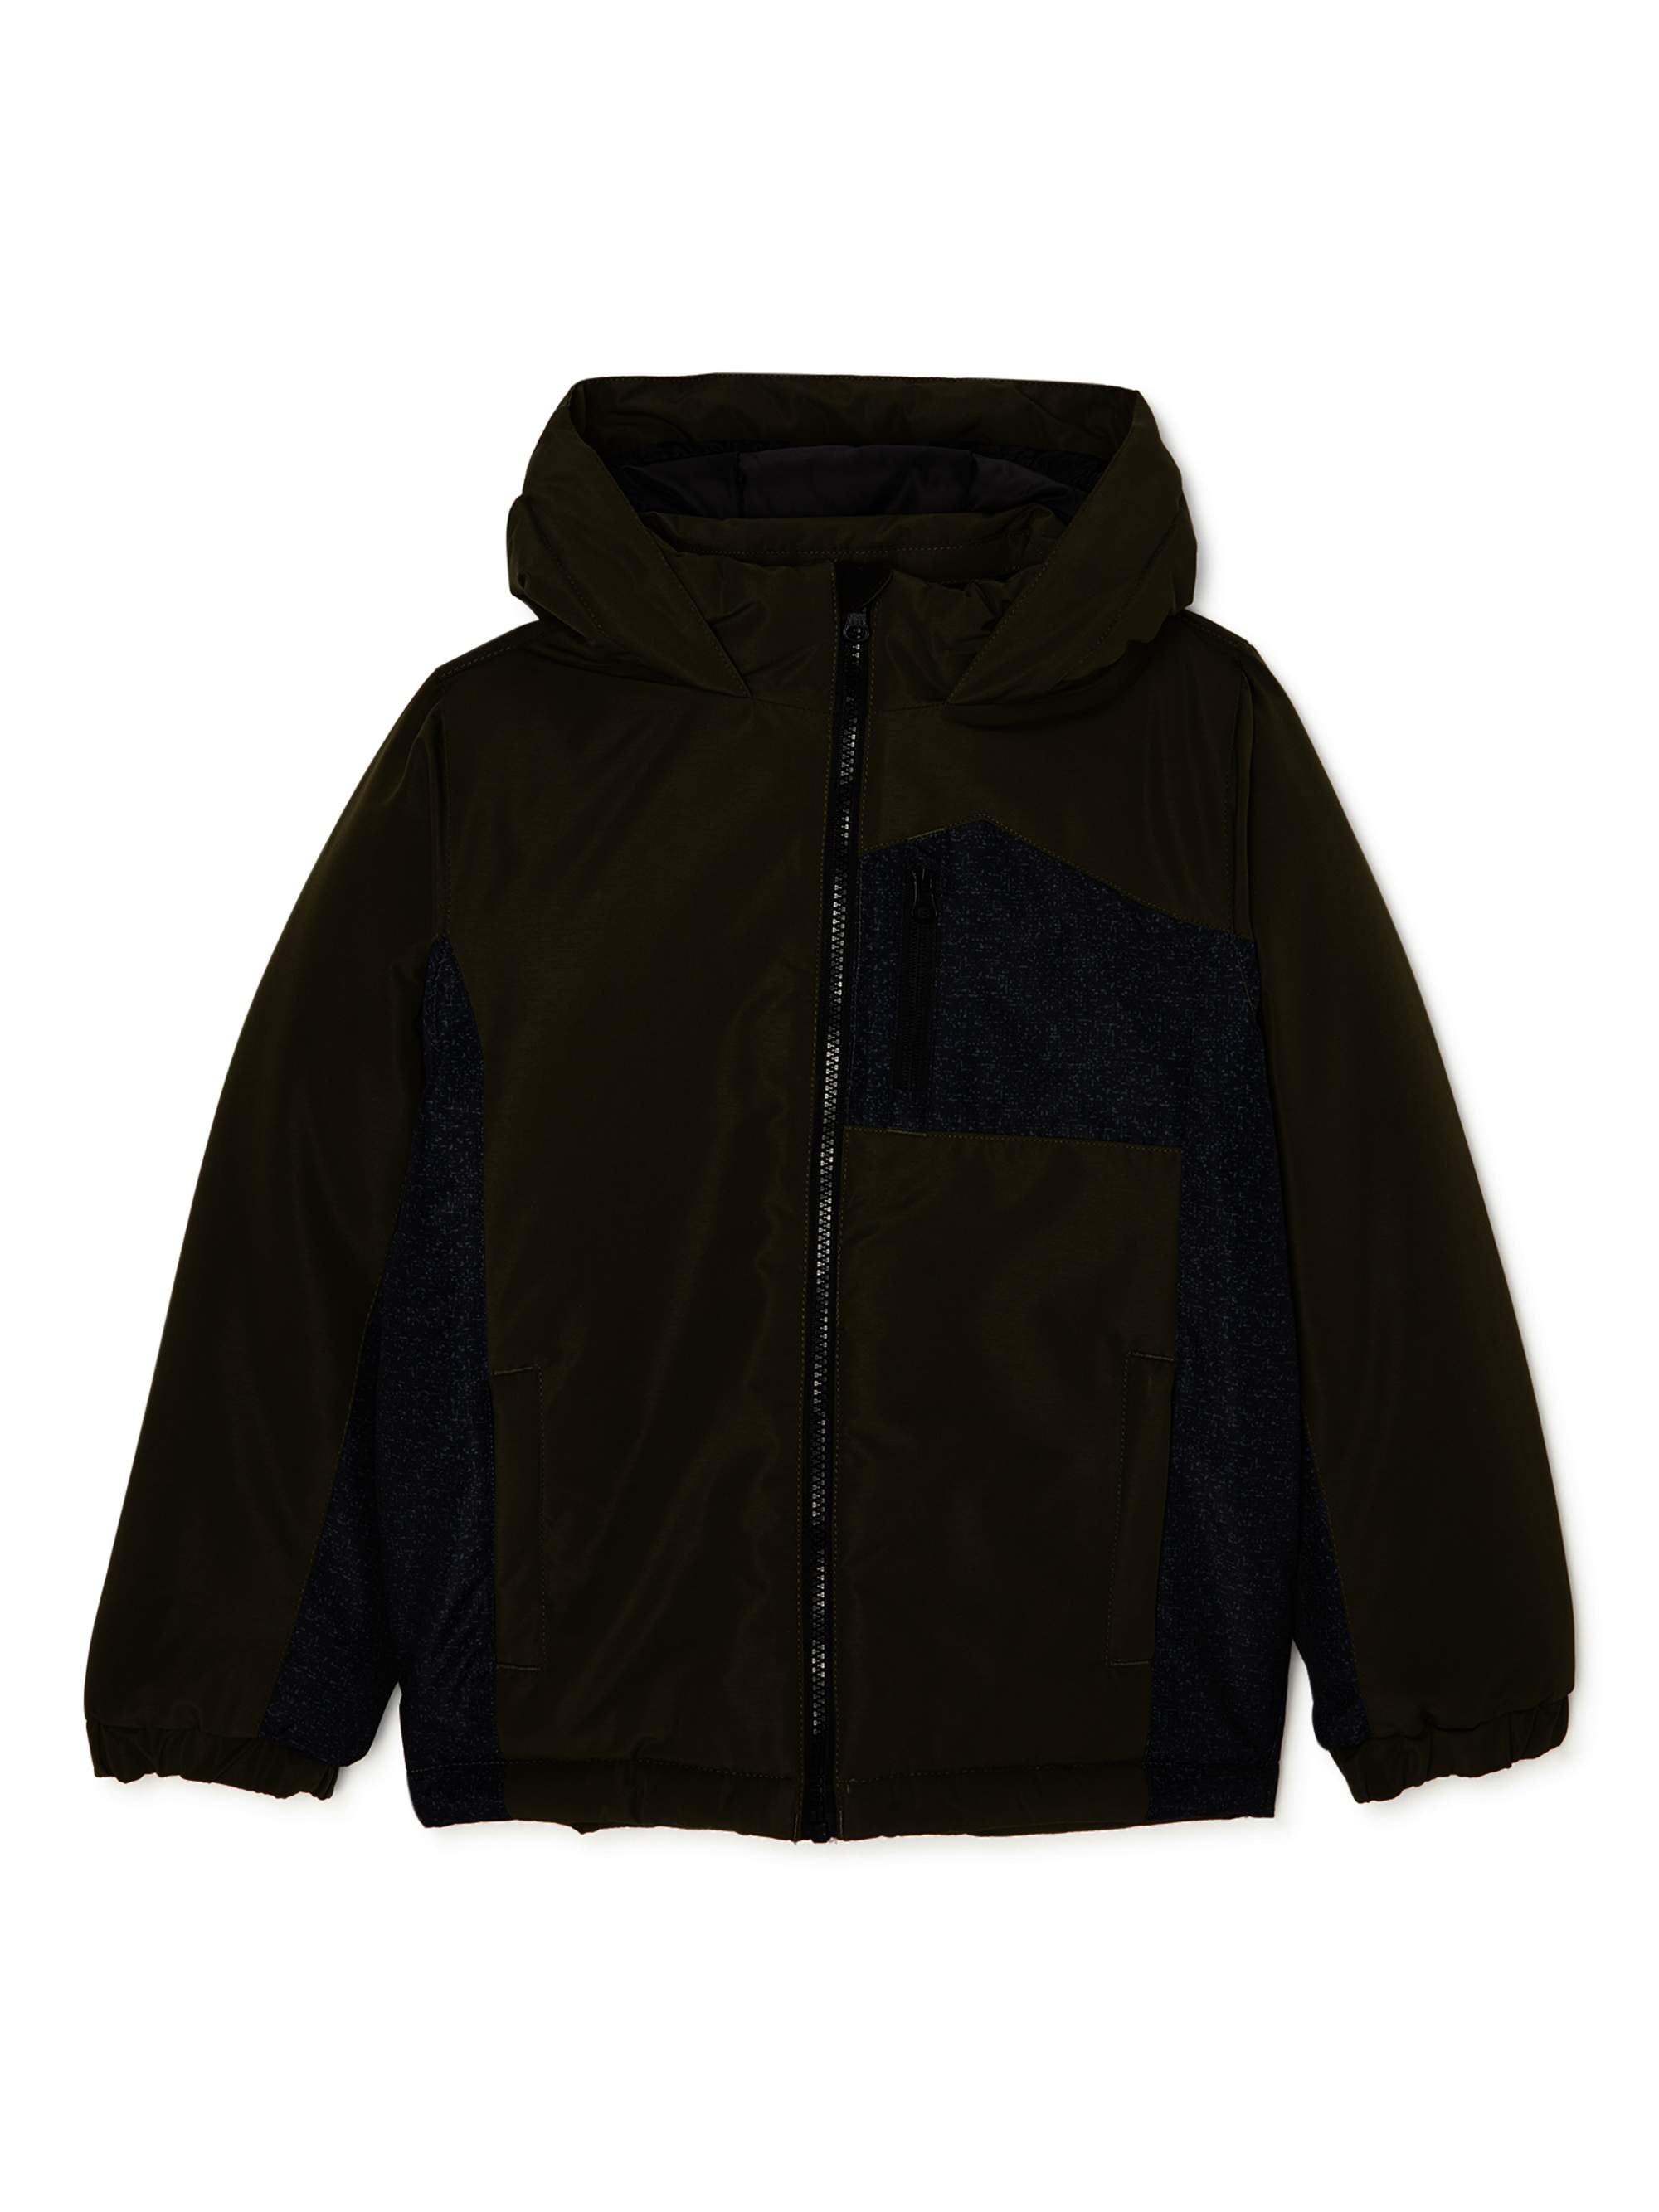 Details about   US Polo Assn Boys Winter Jacket Puffer Coat 